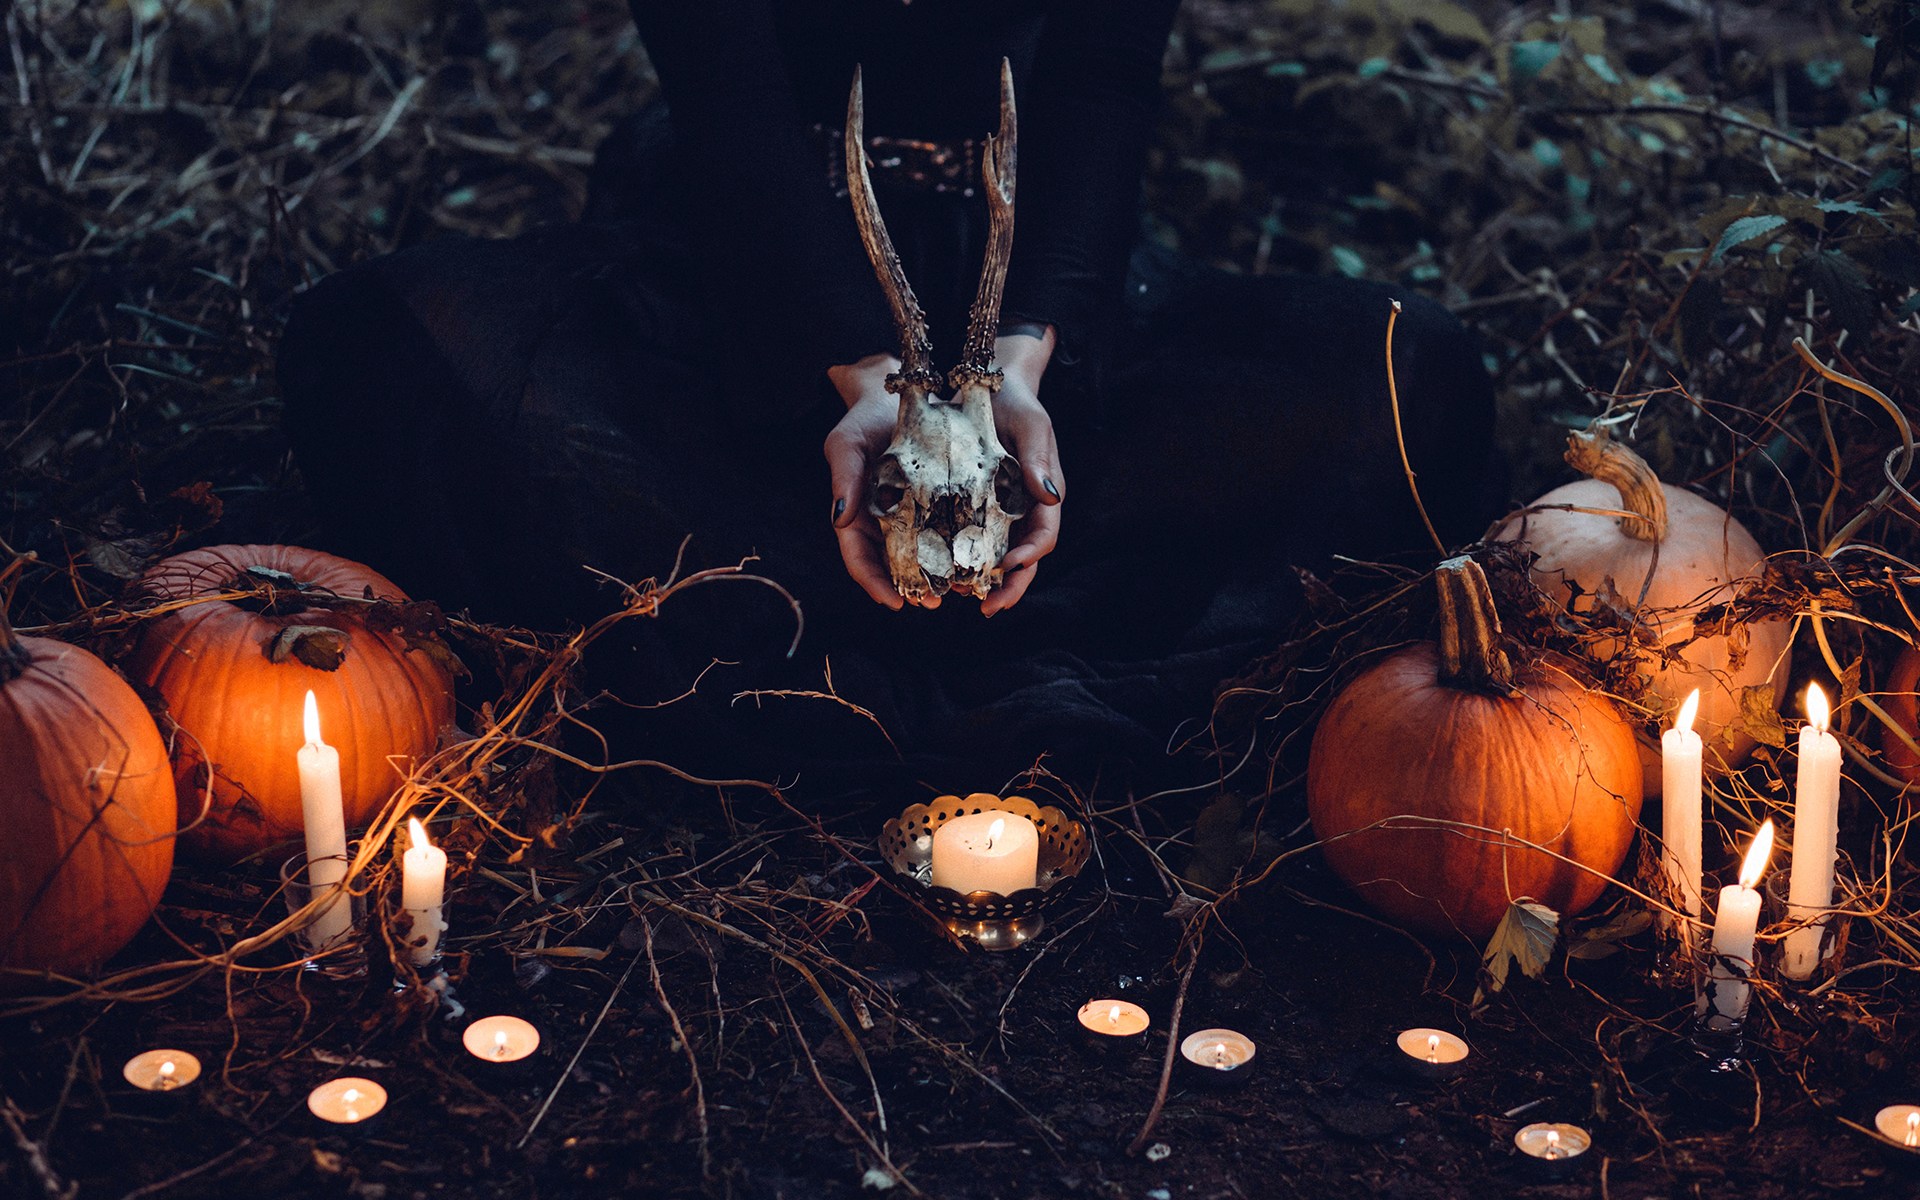 10 Terrifying Facts About Witches That Will Make You Believe They Actually Exist